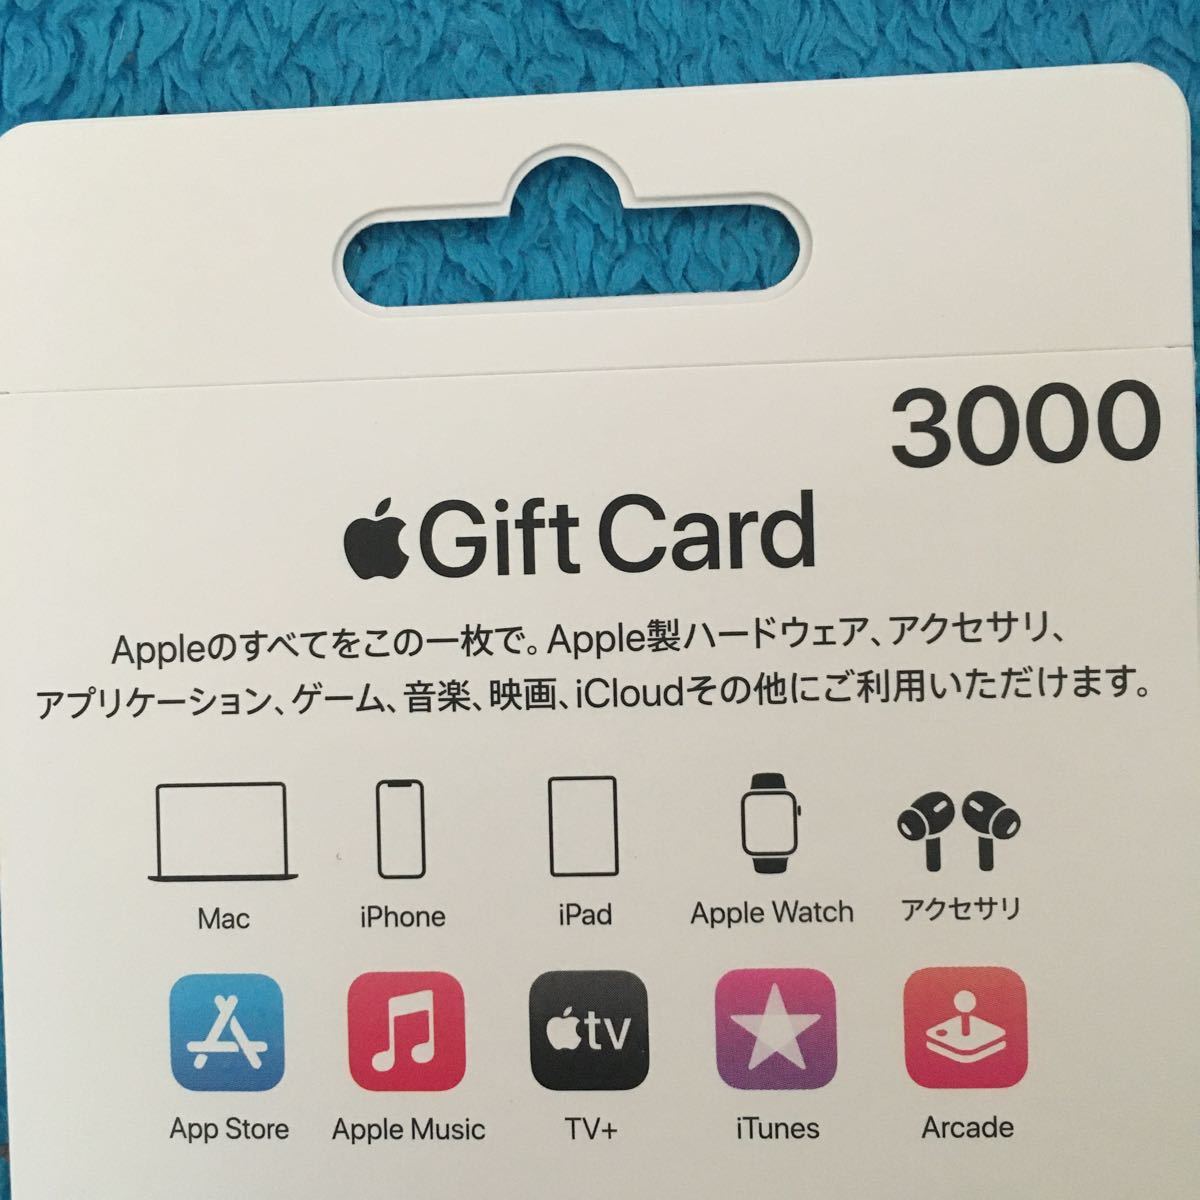 [ code notification free shipping ]Apple Gift Card( Apple gift card ) 3000 jpy minute iTunes card I Tune z card 